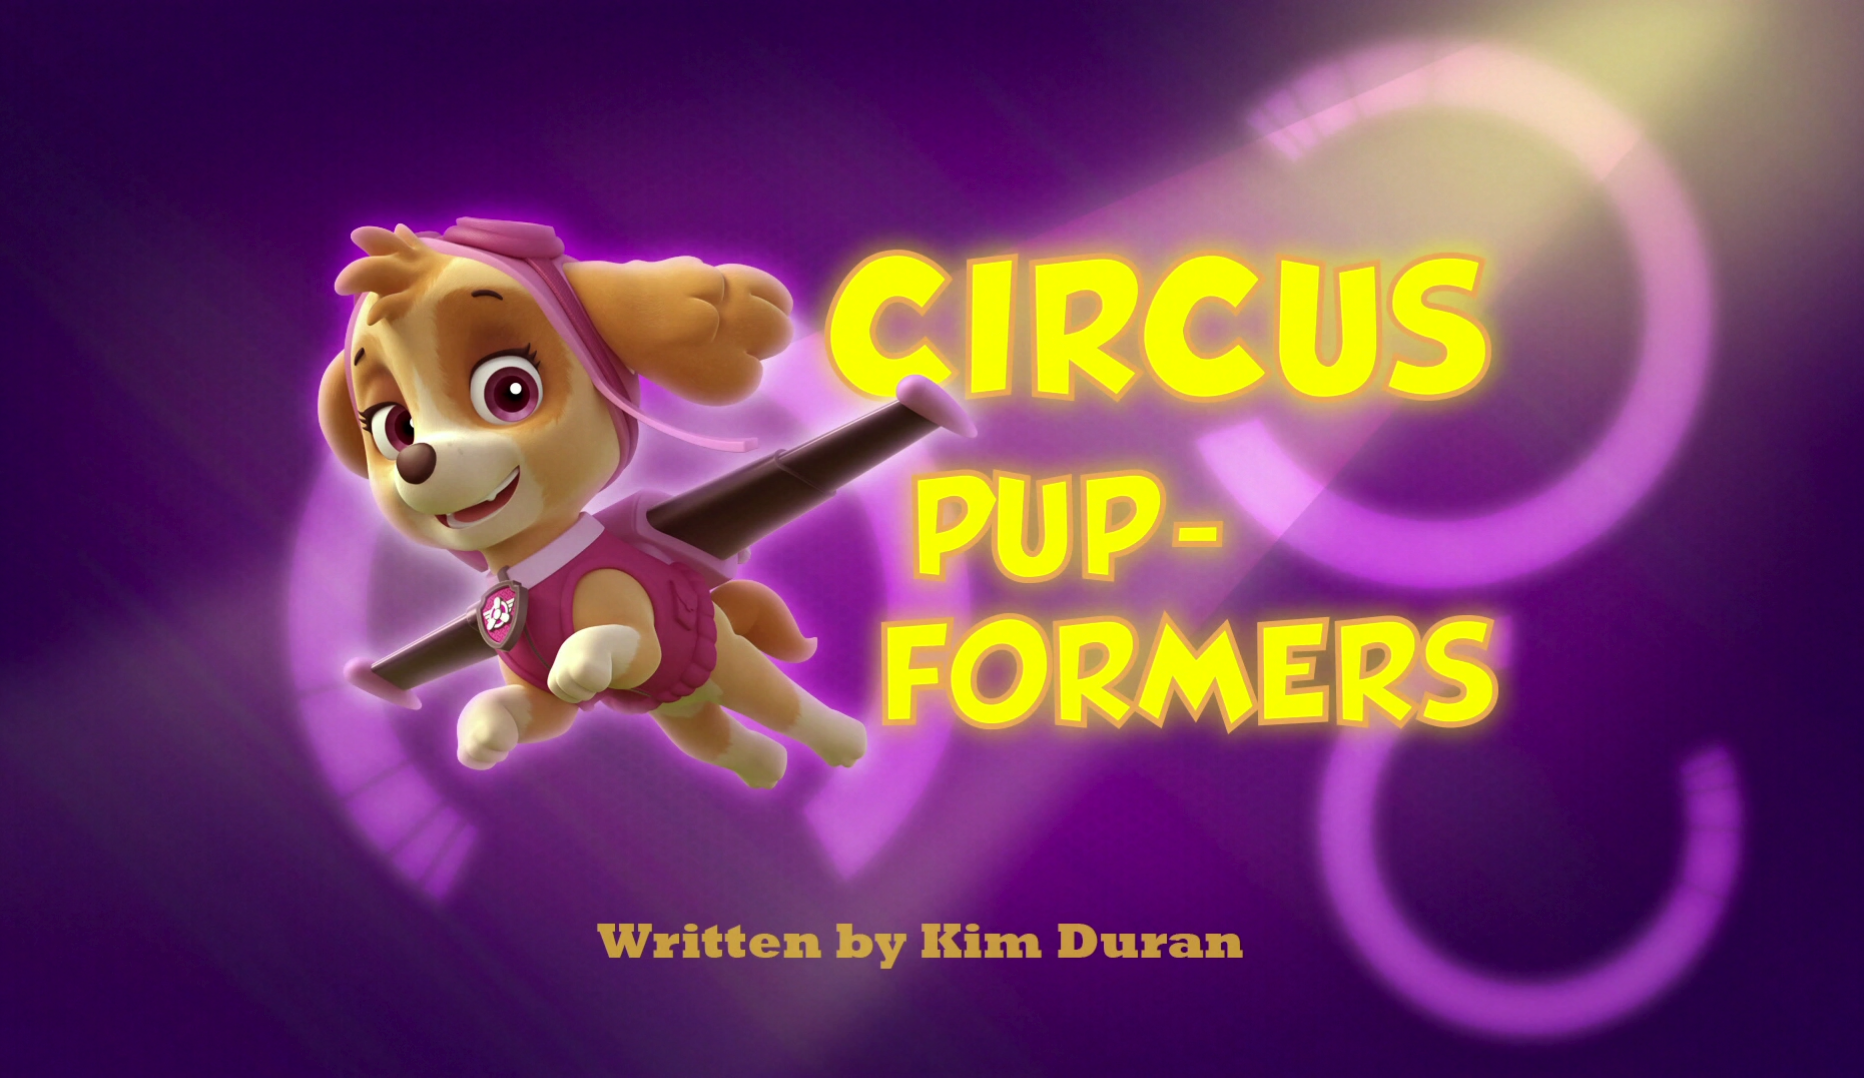 Pup Formers episode title | Paw patrol episodes, Pup, Paw patrol